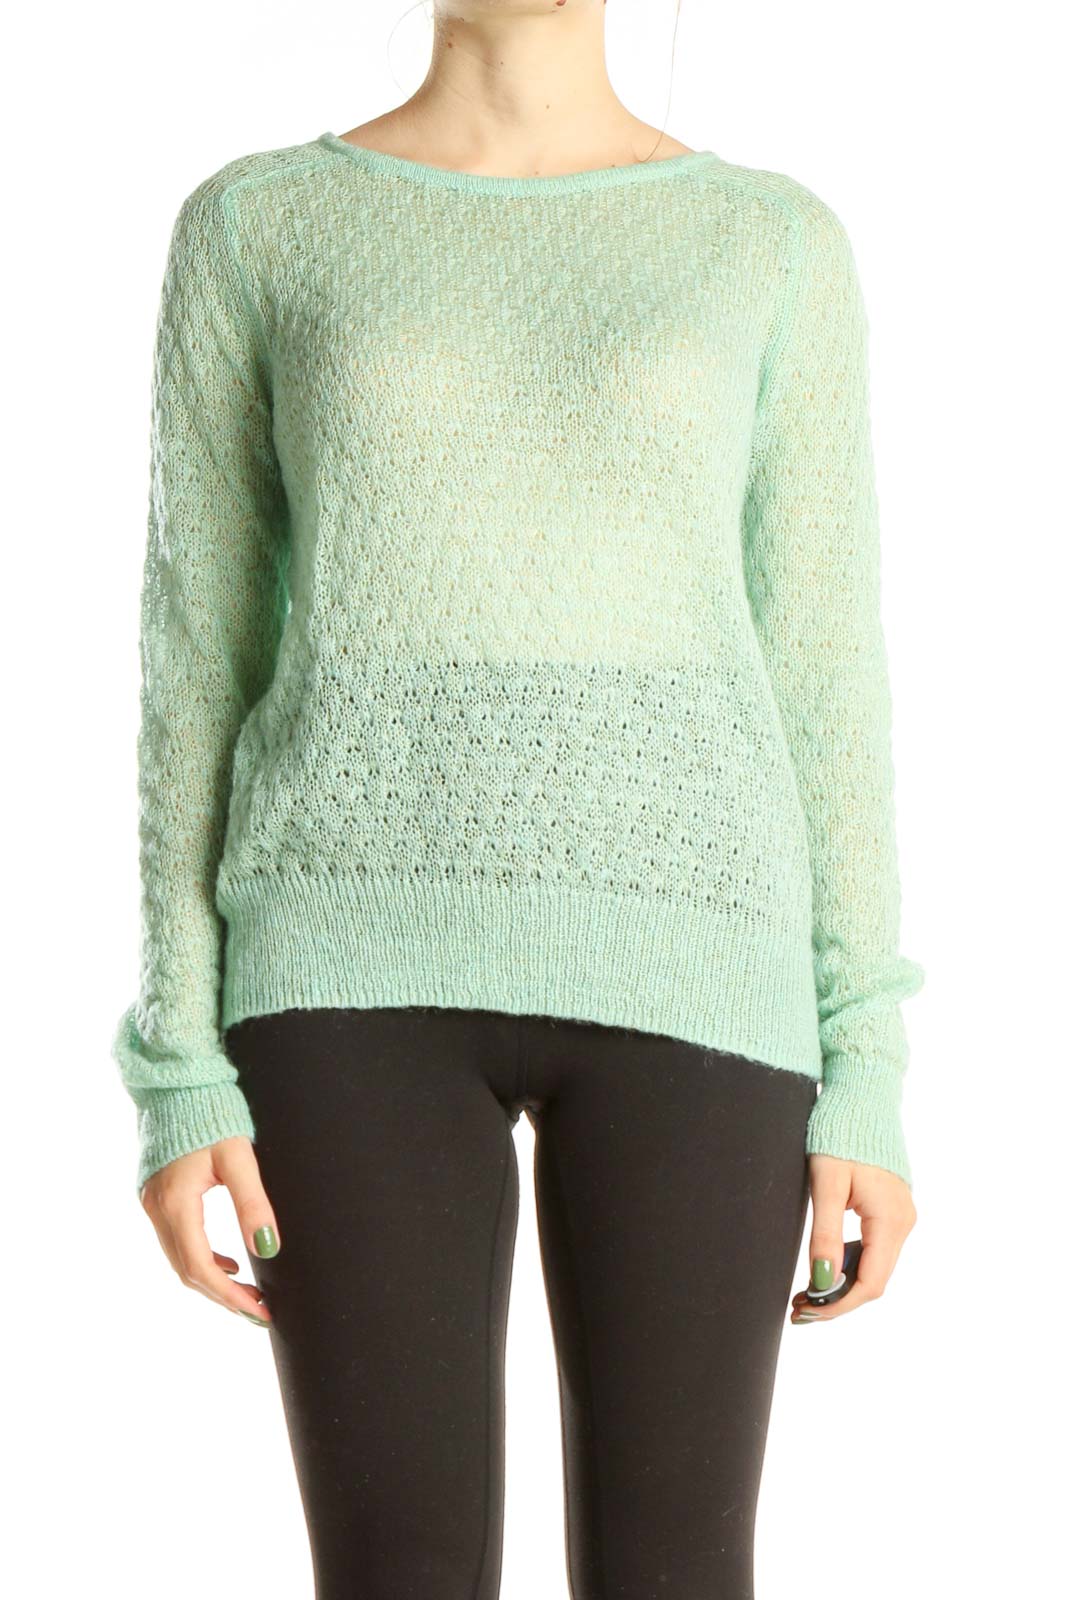 Green All Day Wear Sweater Front